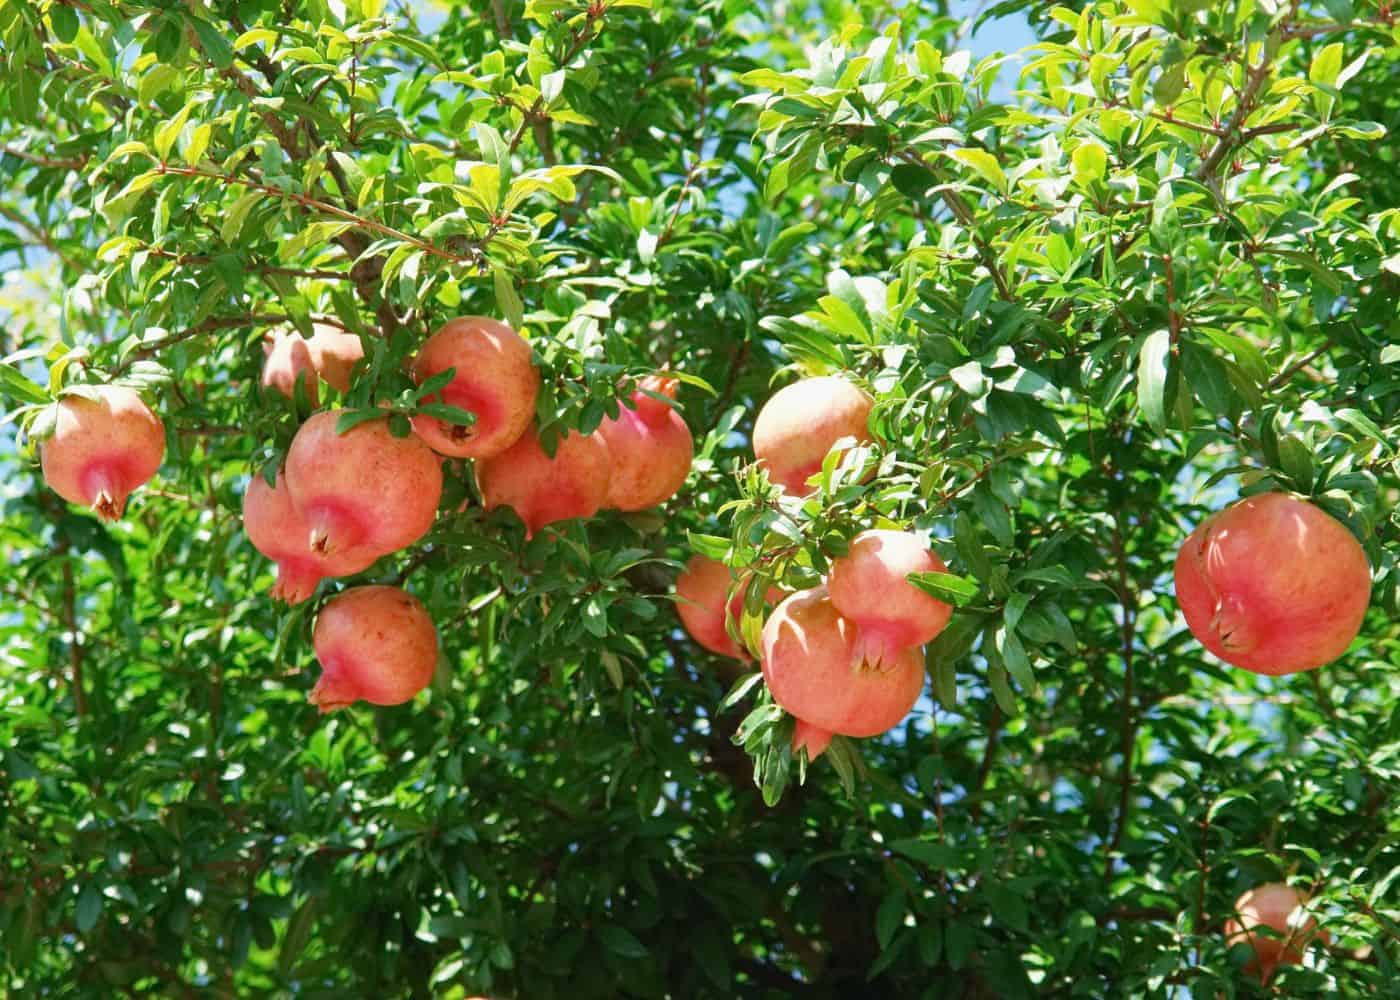 How to care for pomegranate trees at home